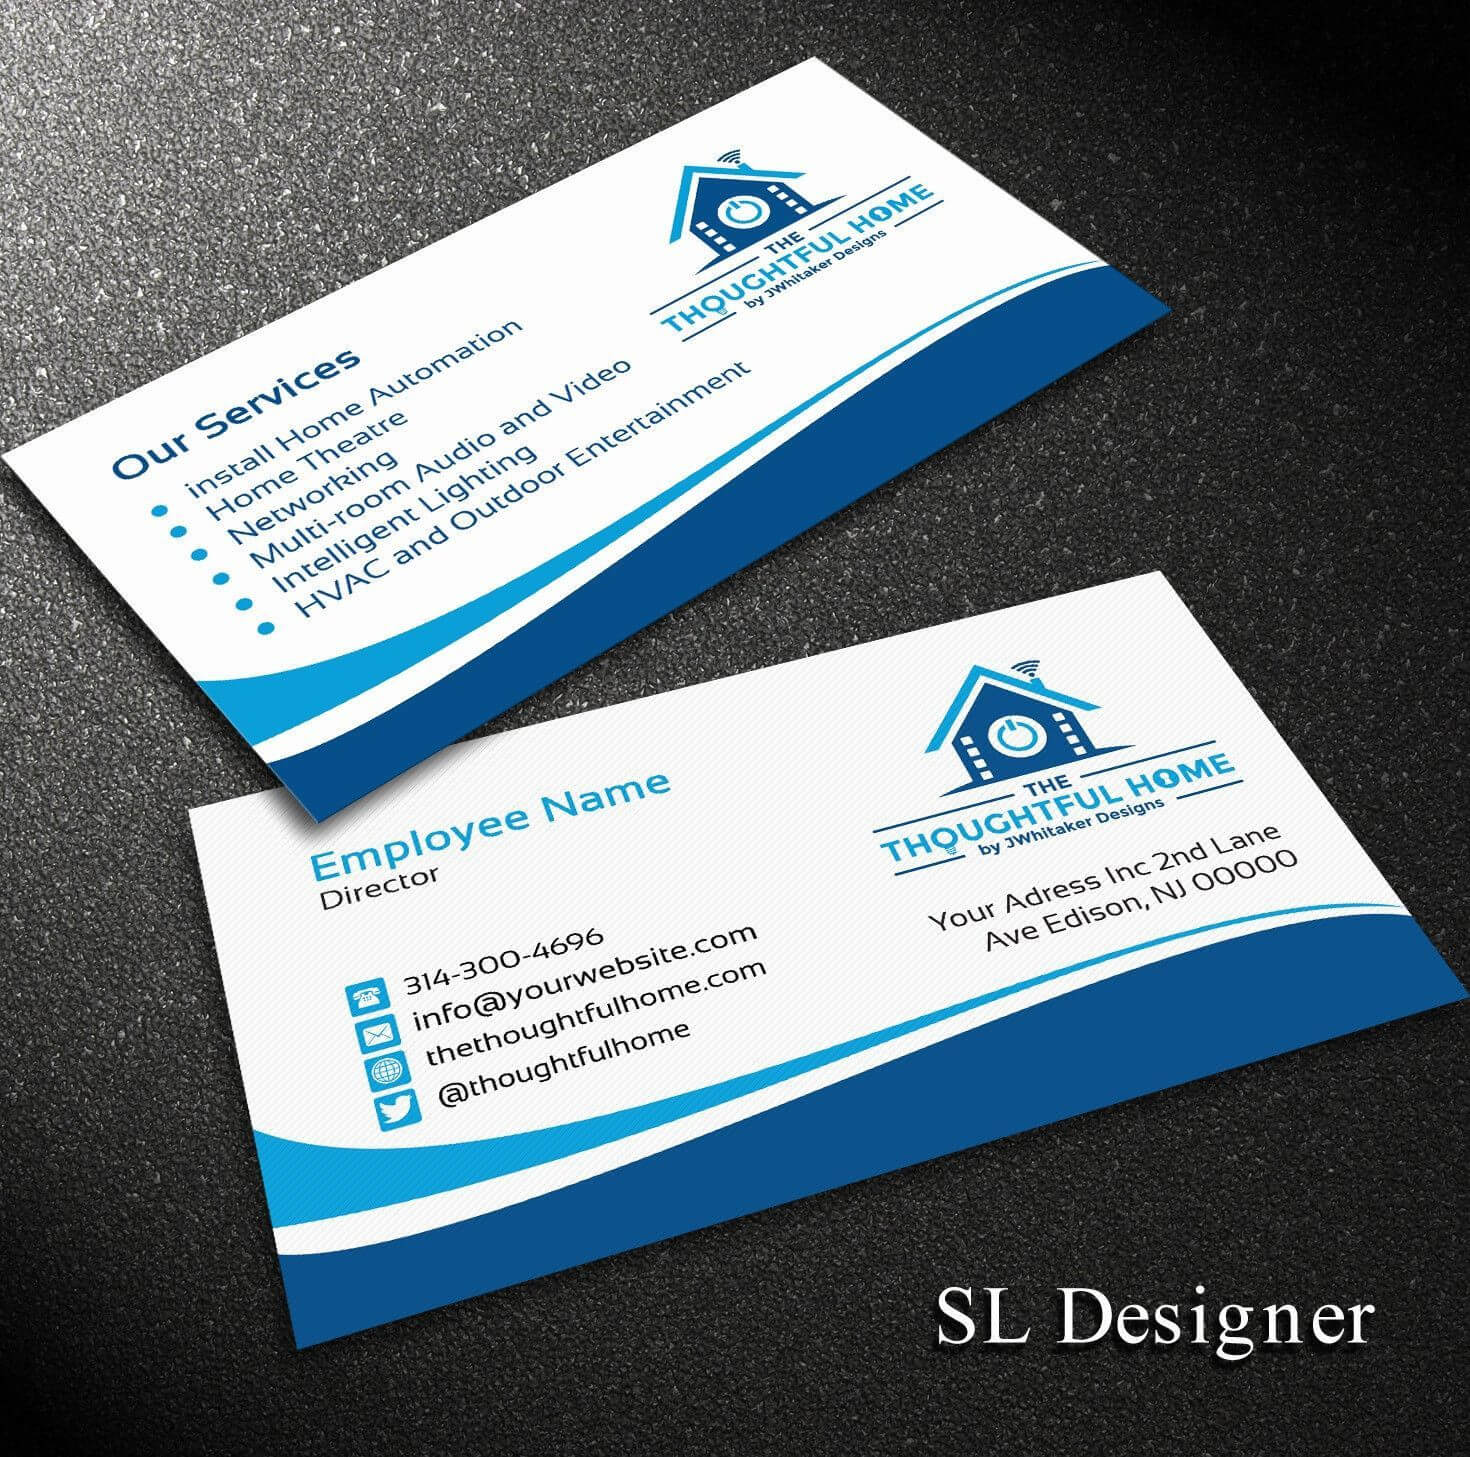 Pinanggunstore On Business Cards Throughout Networking Card Template